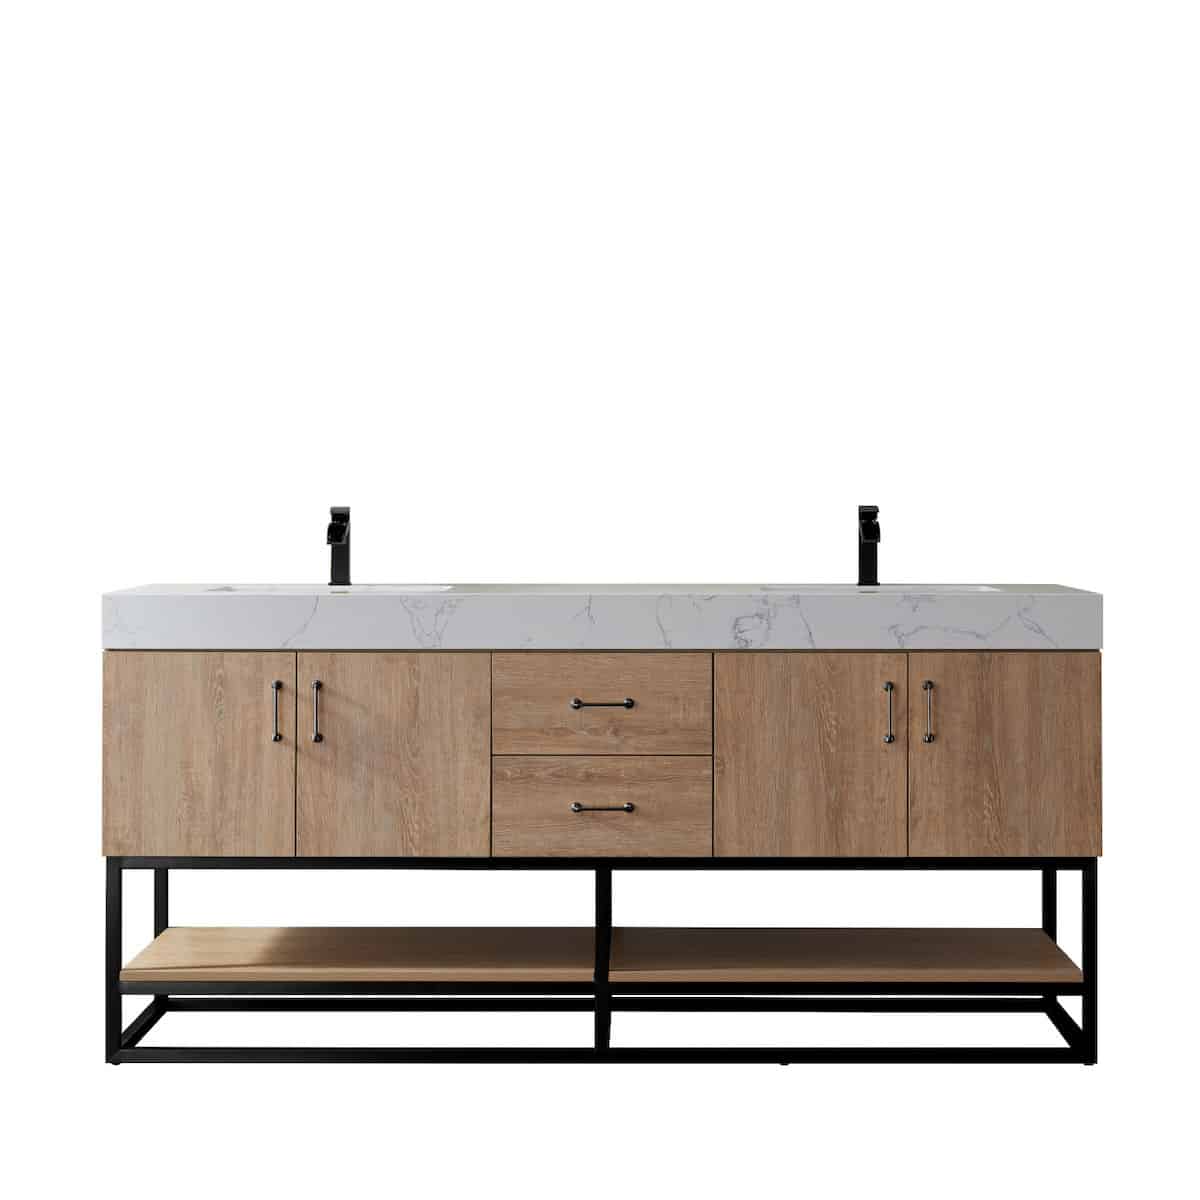 Vinnova Alistair 72 Inch Freestanding Double Vanity in North American Oak and Matte Black Frame with White Grain Stone Countertop Without Mirrors 789072B-NO-GW-NM